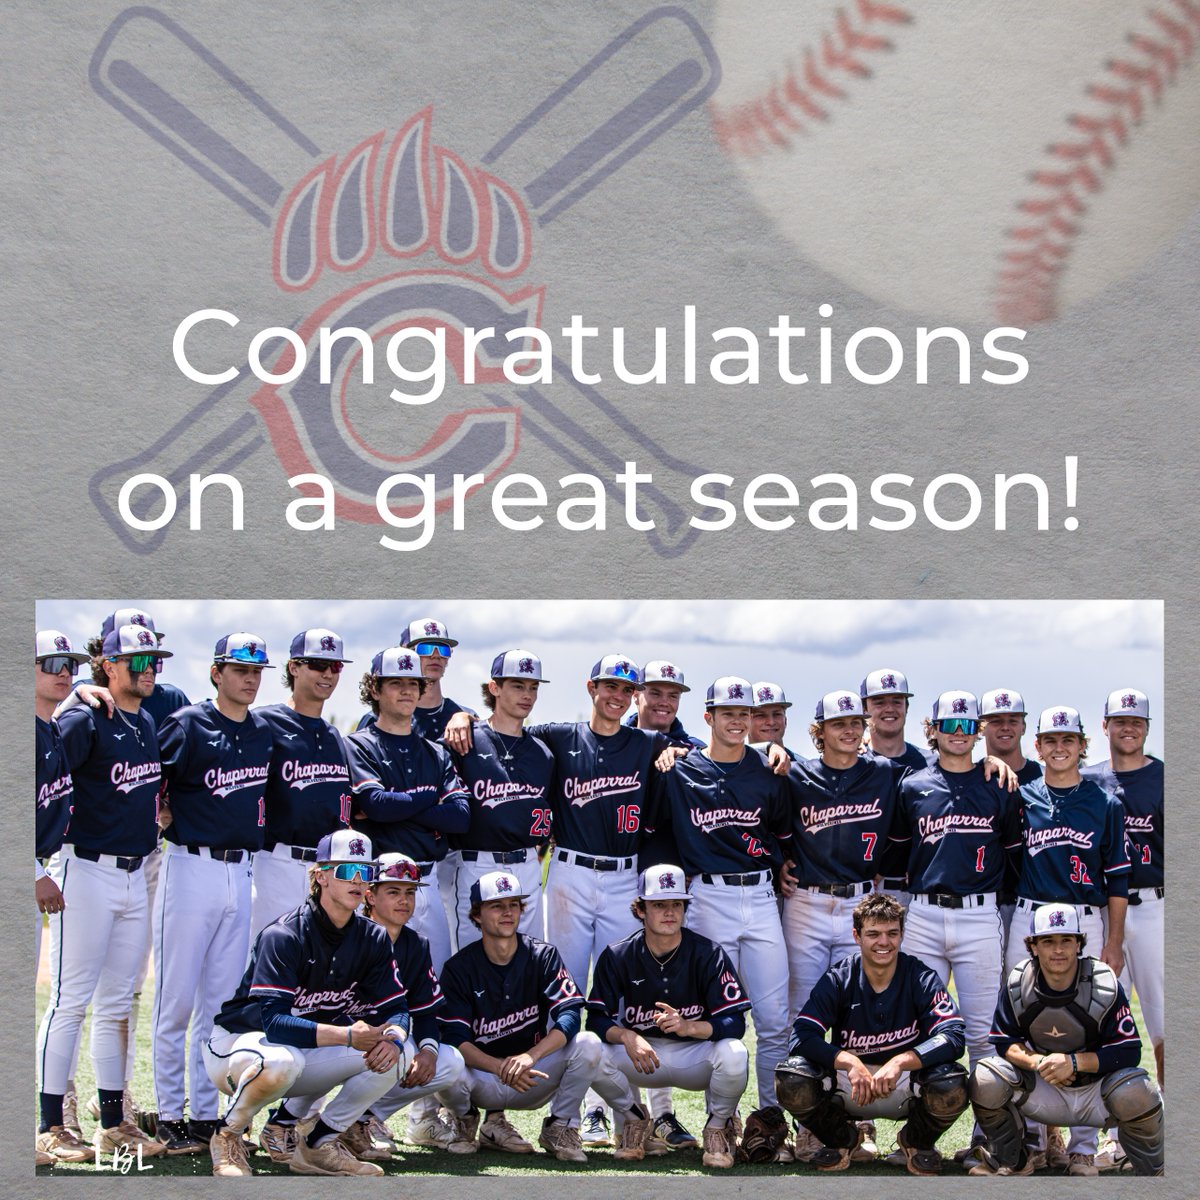 You had a great run, Chap Varsity! We are proud of you and all you accomplished this season!